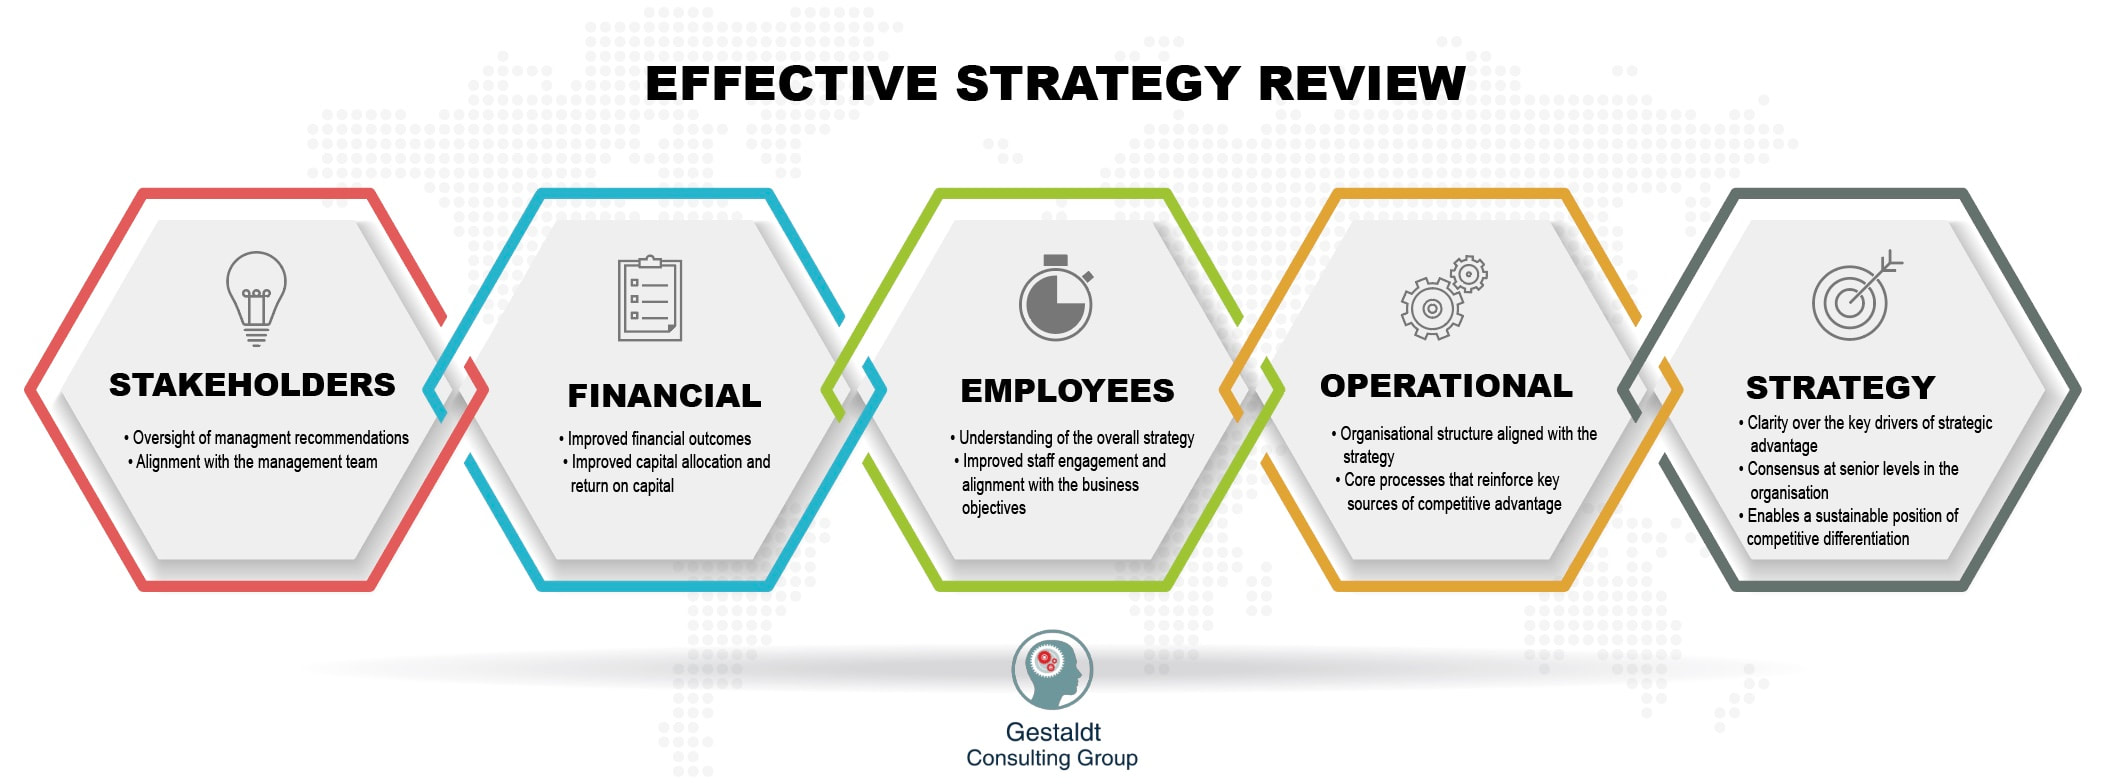 Gestaldt Strategy Review